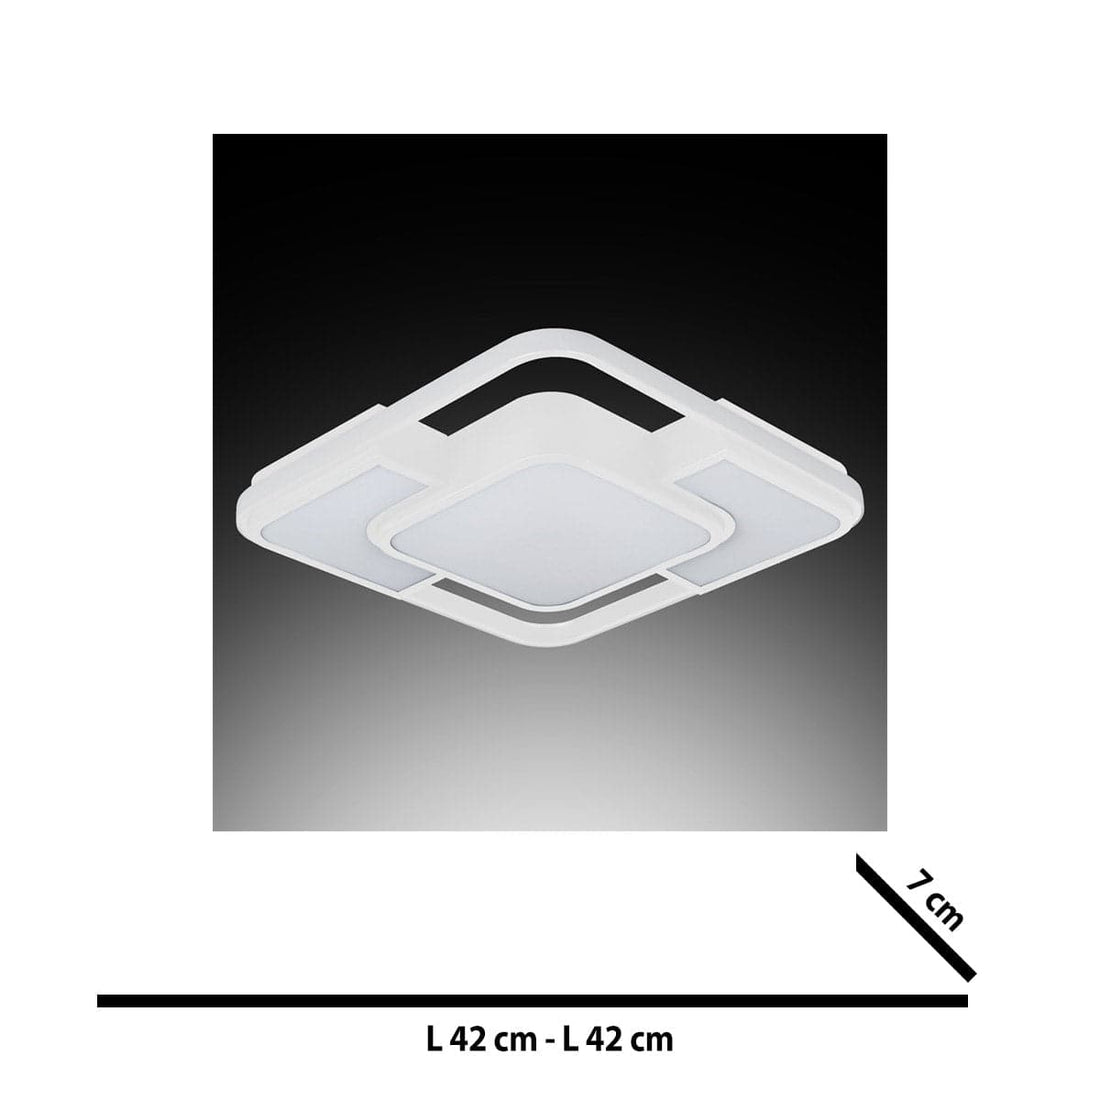 CEILING LAMP ALICIA METAL WHITE 42X42CM LED 36W CCT DIMMABLE - best price from Maltashopper.com BR420008175